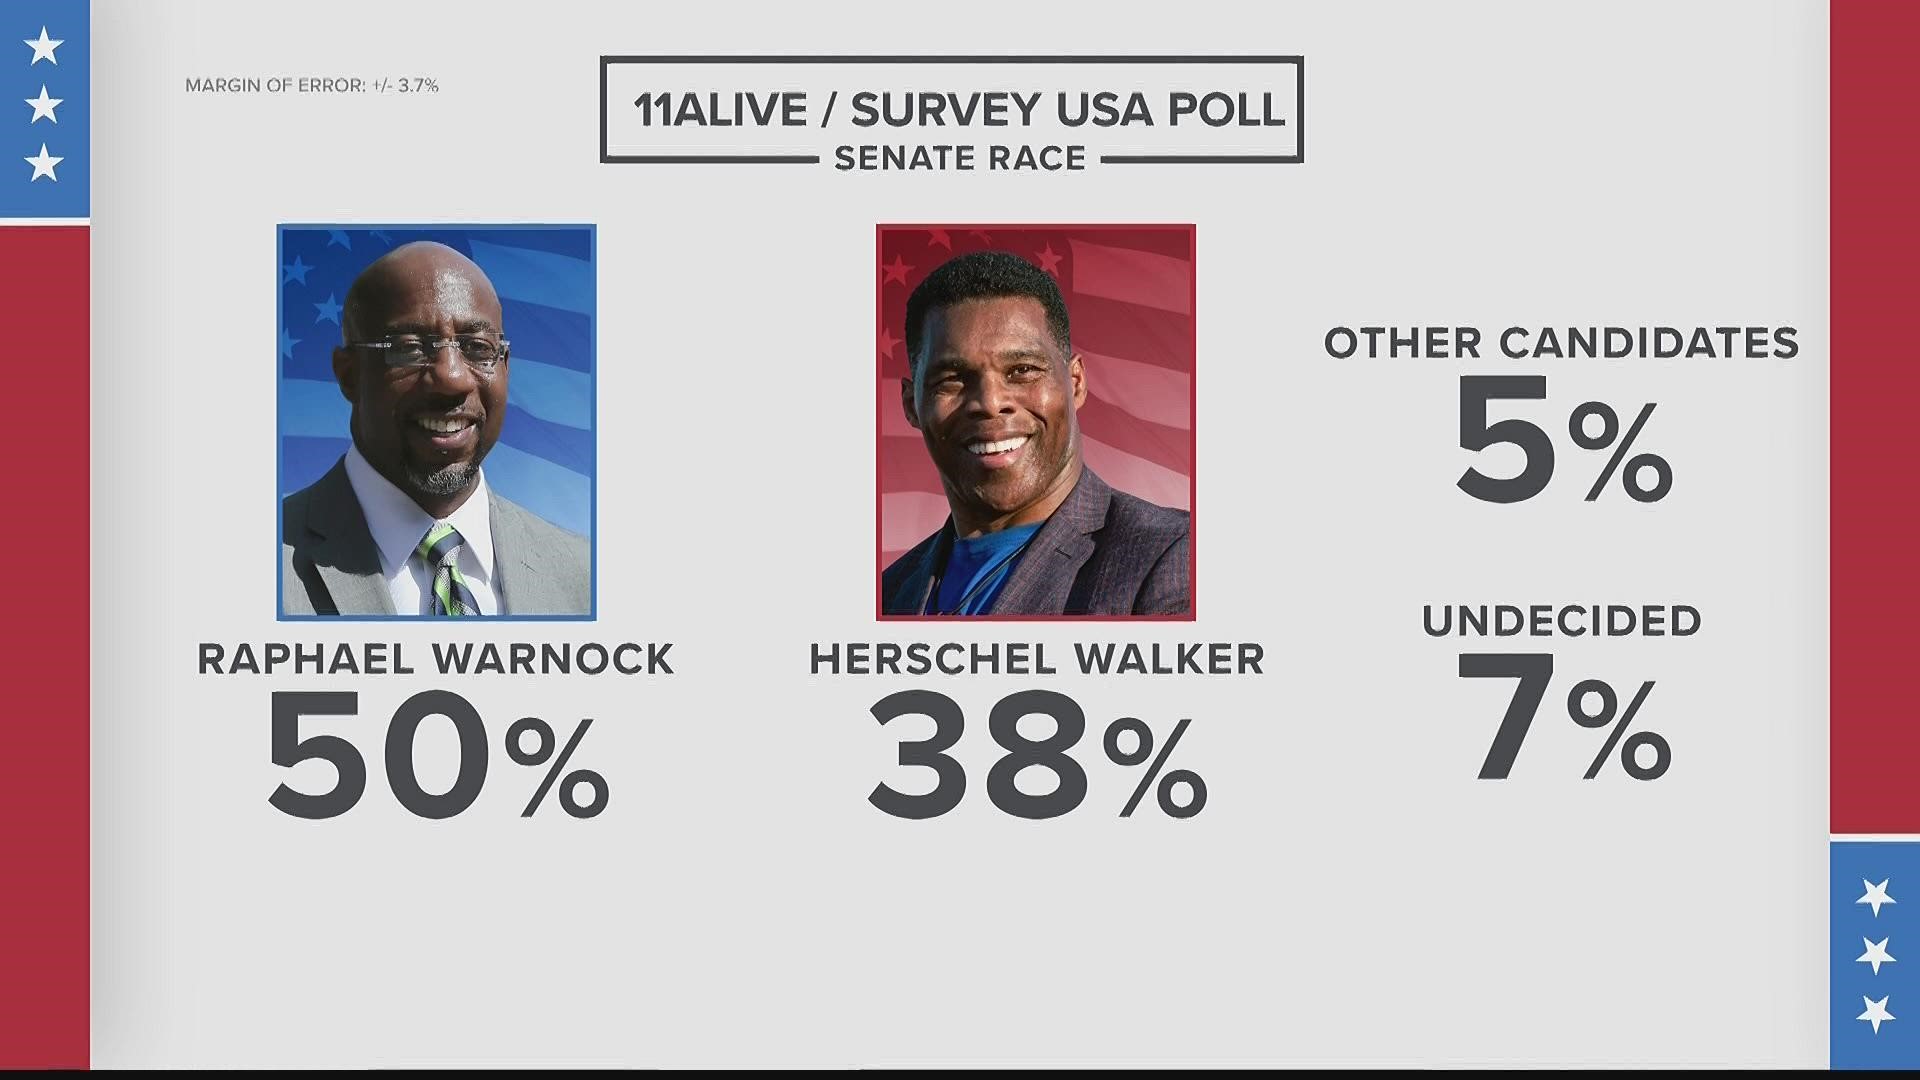 11Alive conducted a poll of more than 1,000 likely November voters on their preference between Herschel Walker and Raphael Warnock in the Georgia Senate race.